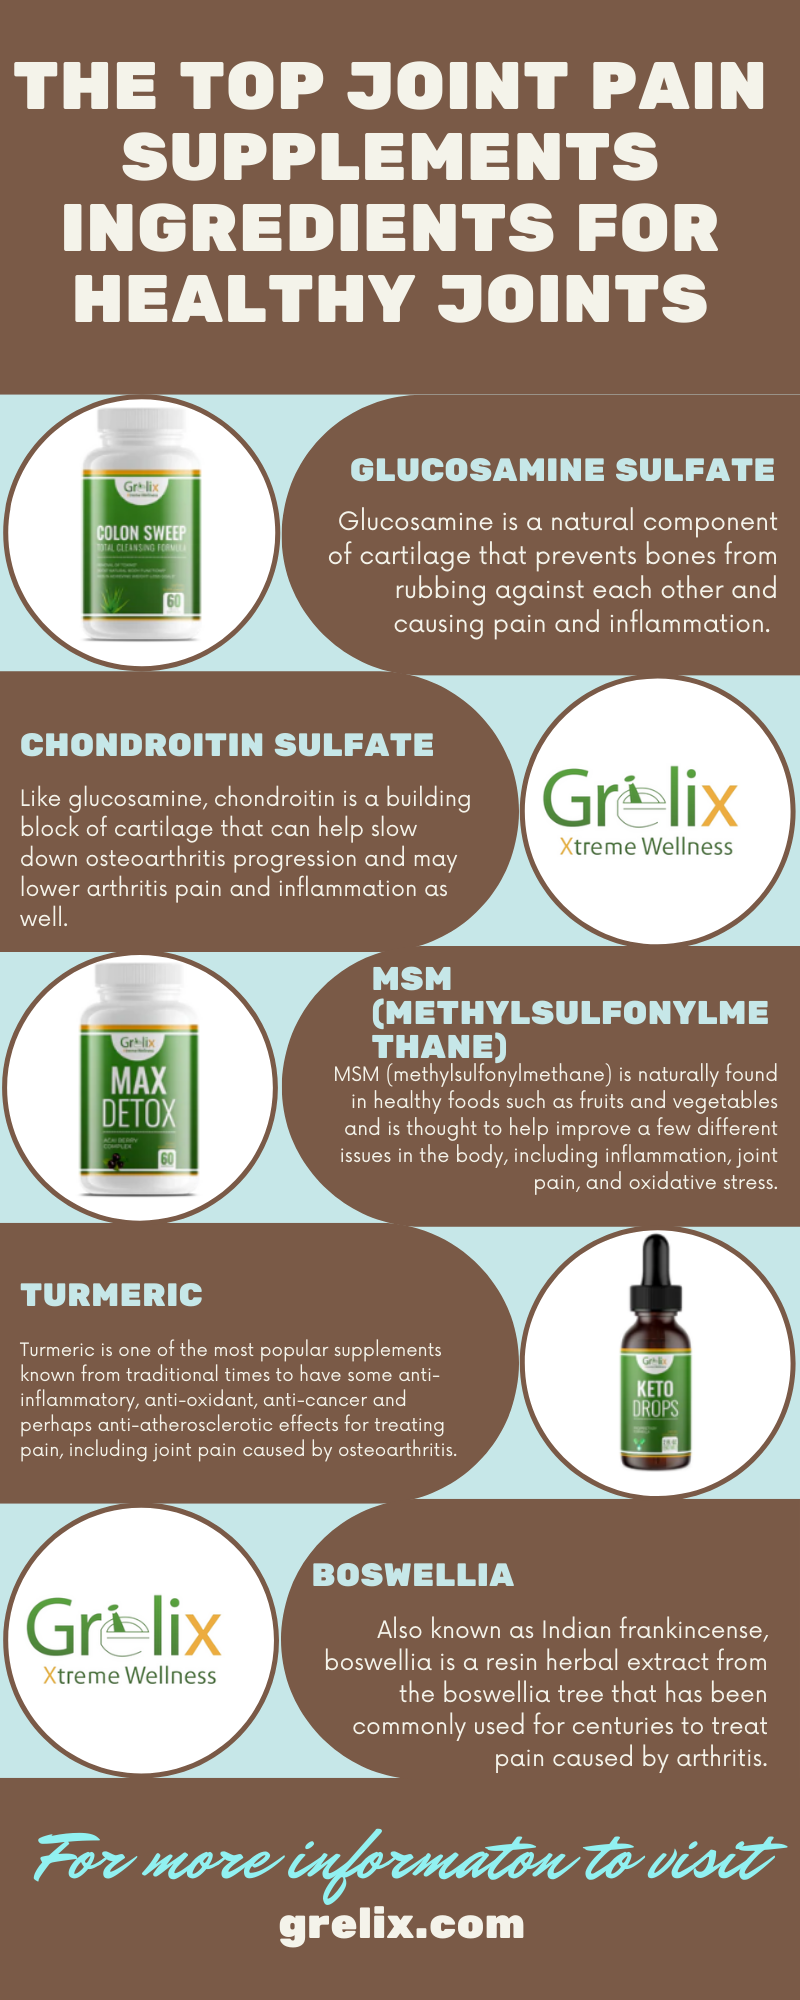 The top joint pain supplements ingredients for healthy joints (1).png  by grelix